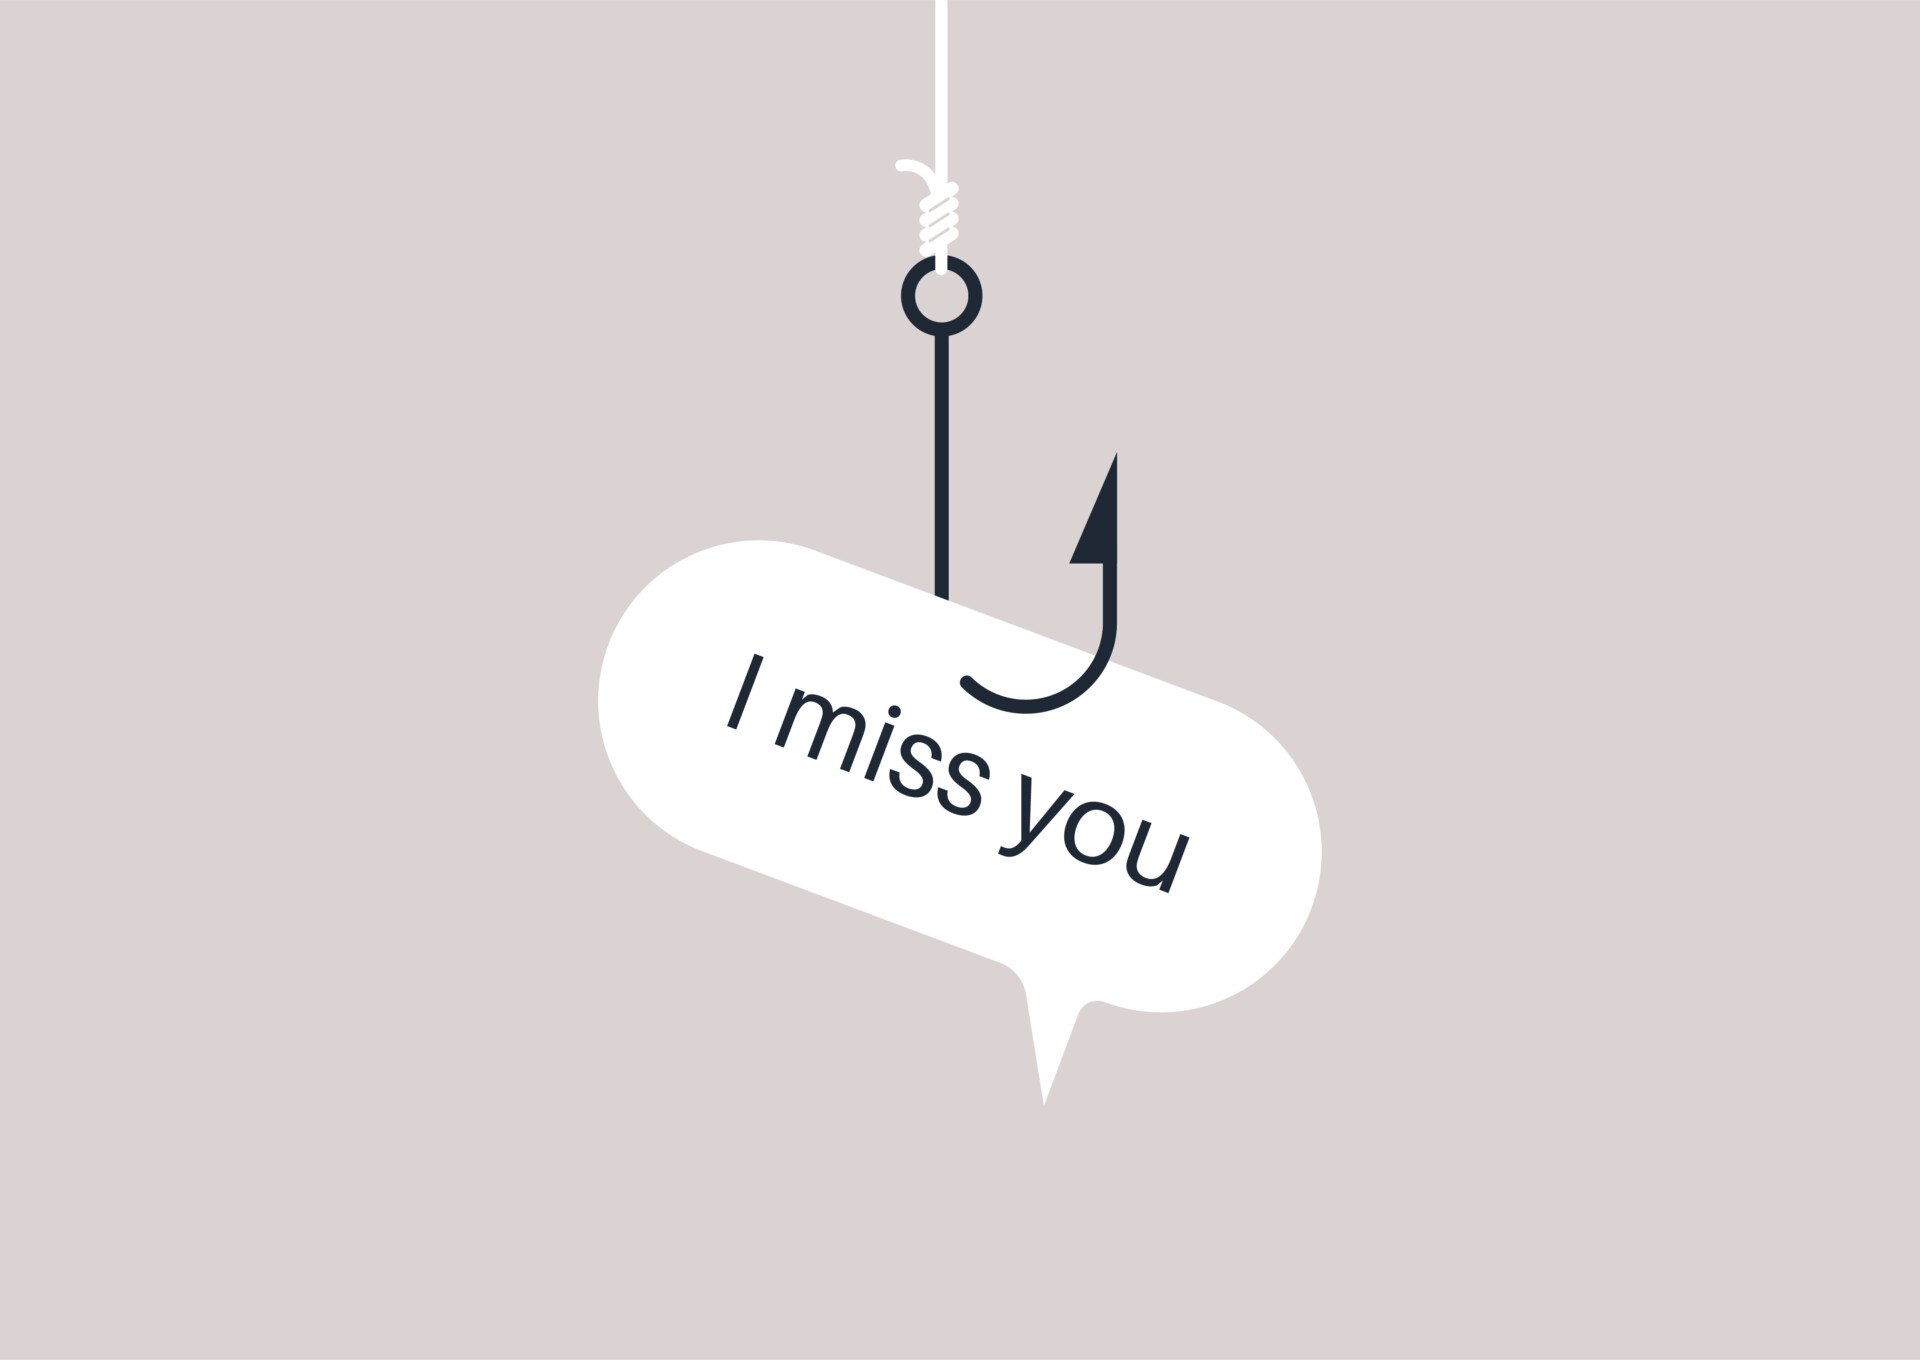 I miss you messaged used as a bait, manipulations in relationships, control and dependence